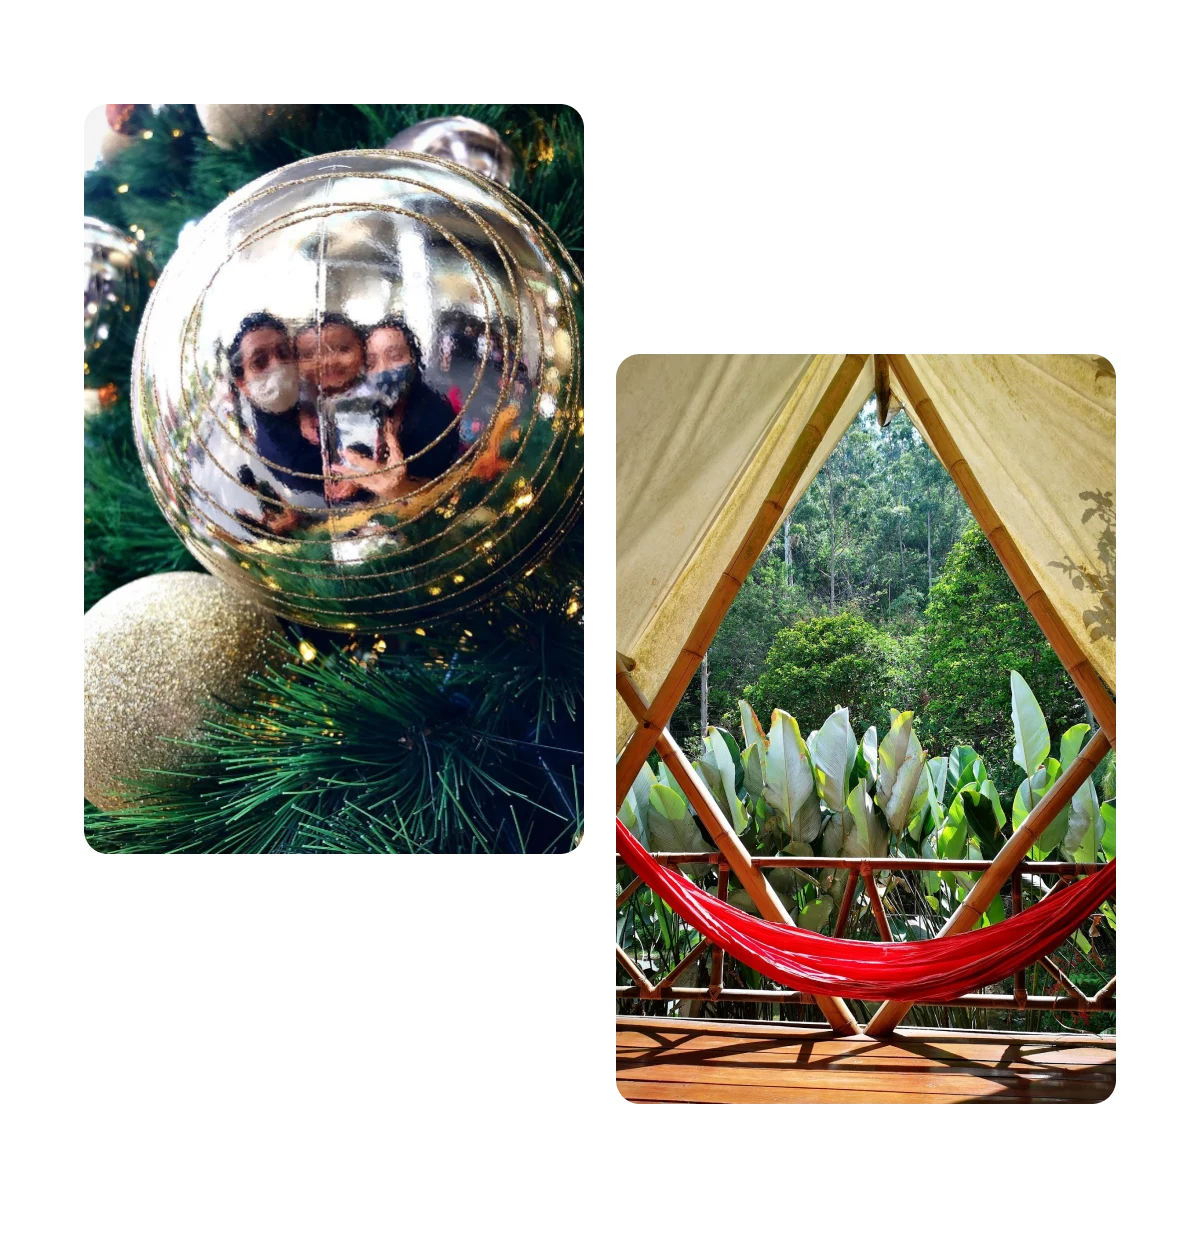 Two pins, reflection of family in mirrored ornament, hammock at tropical location